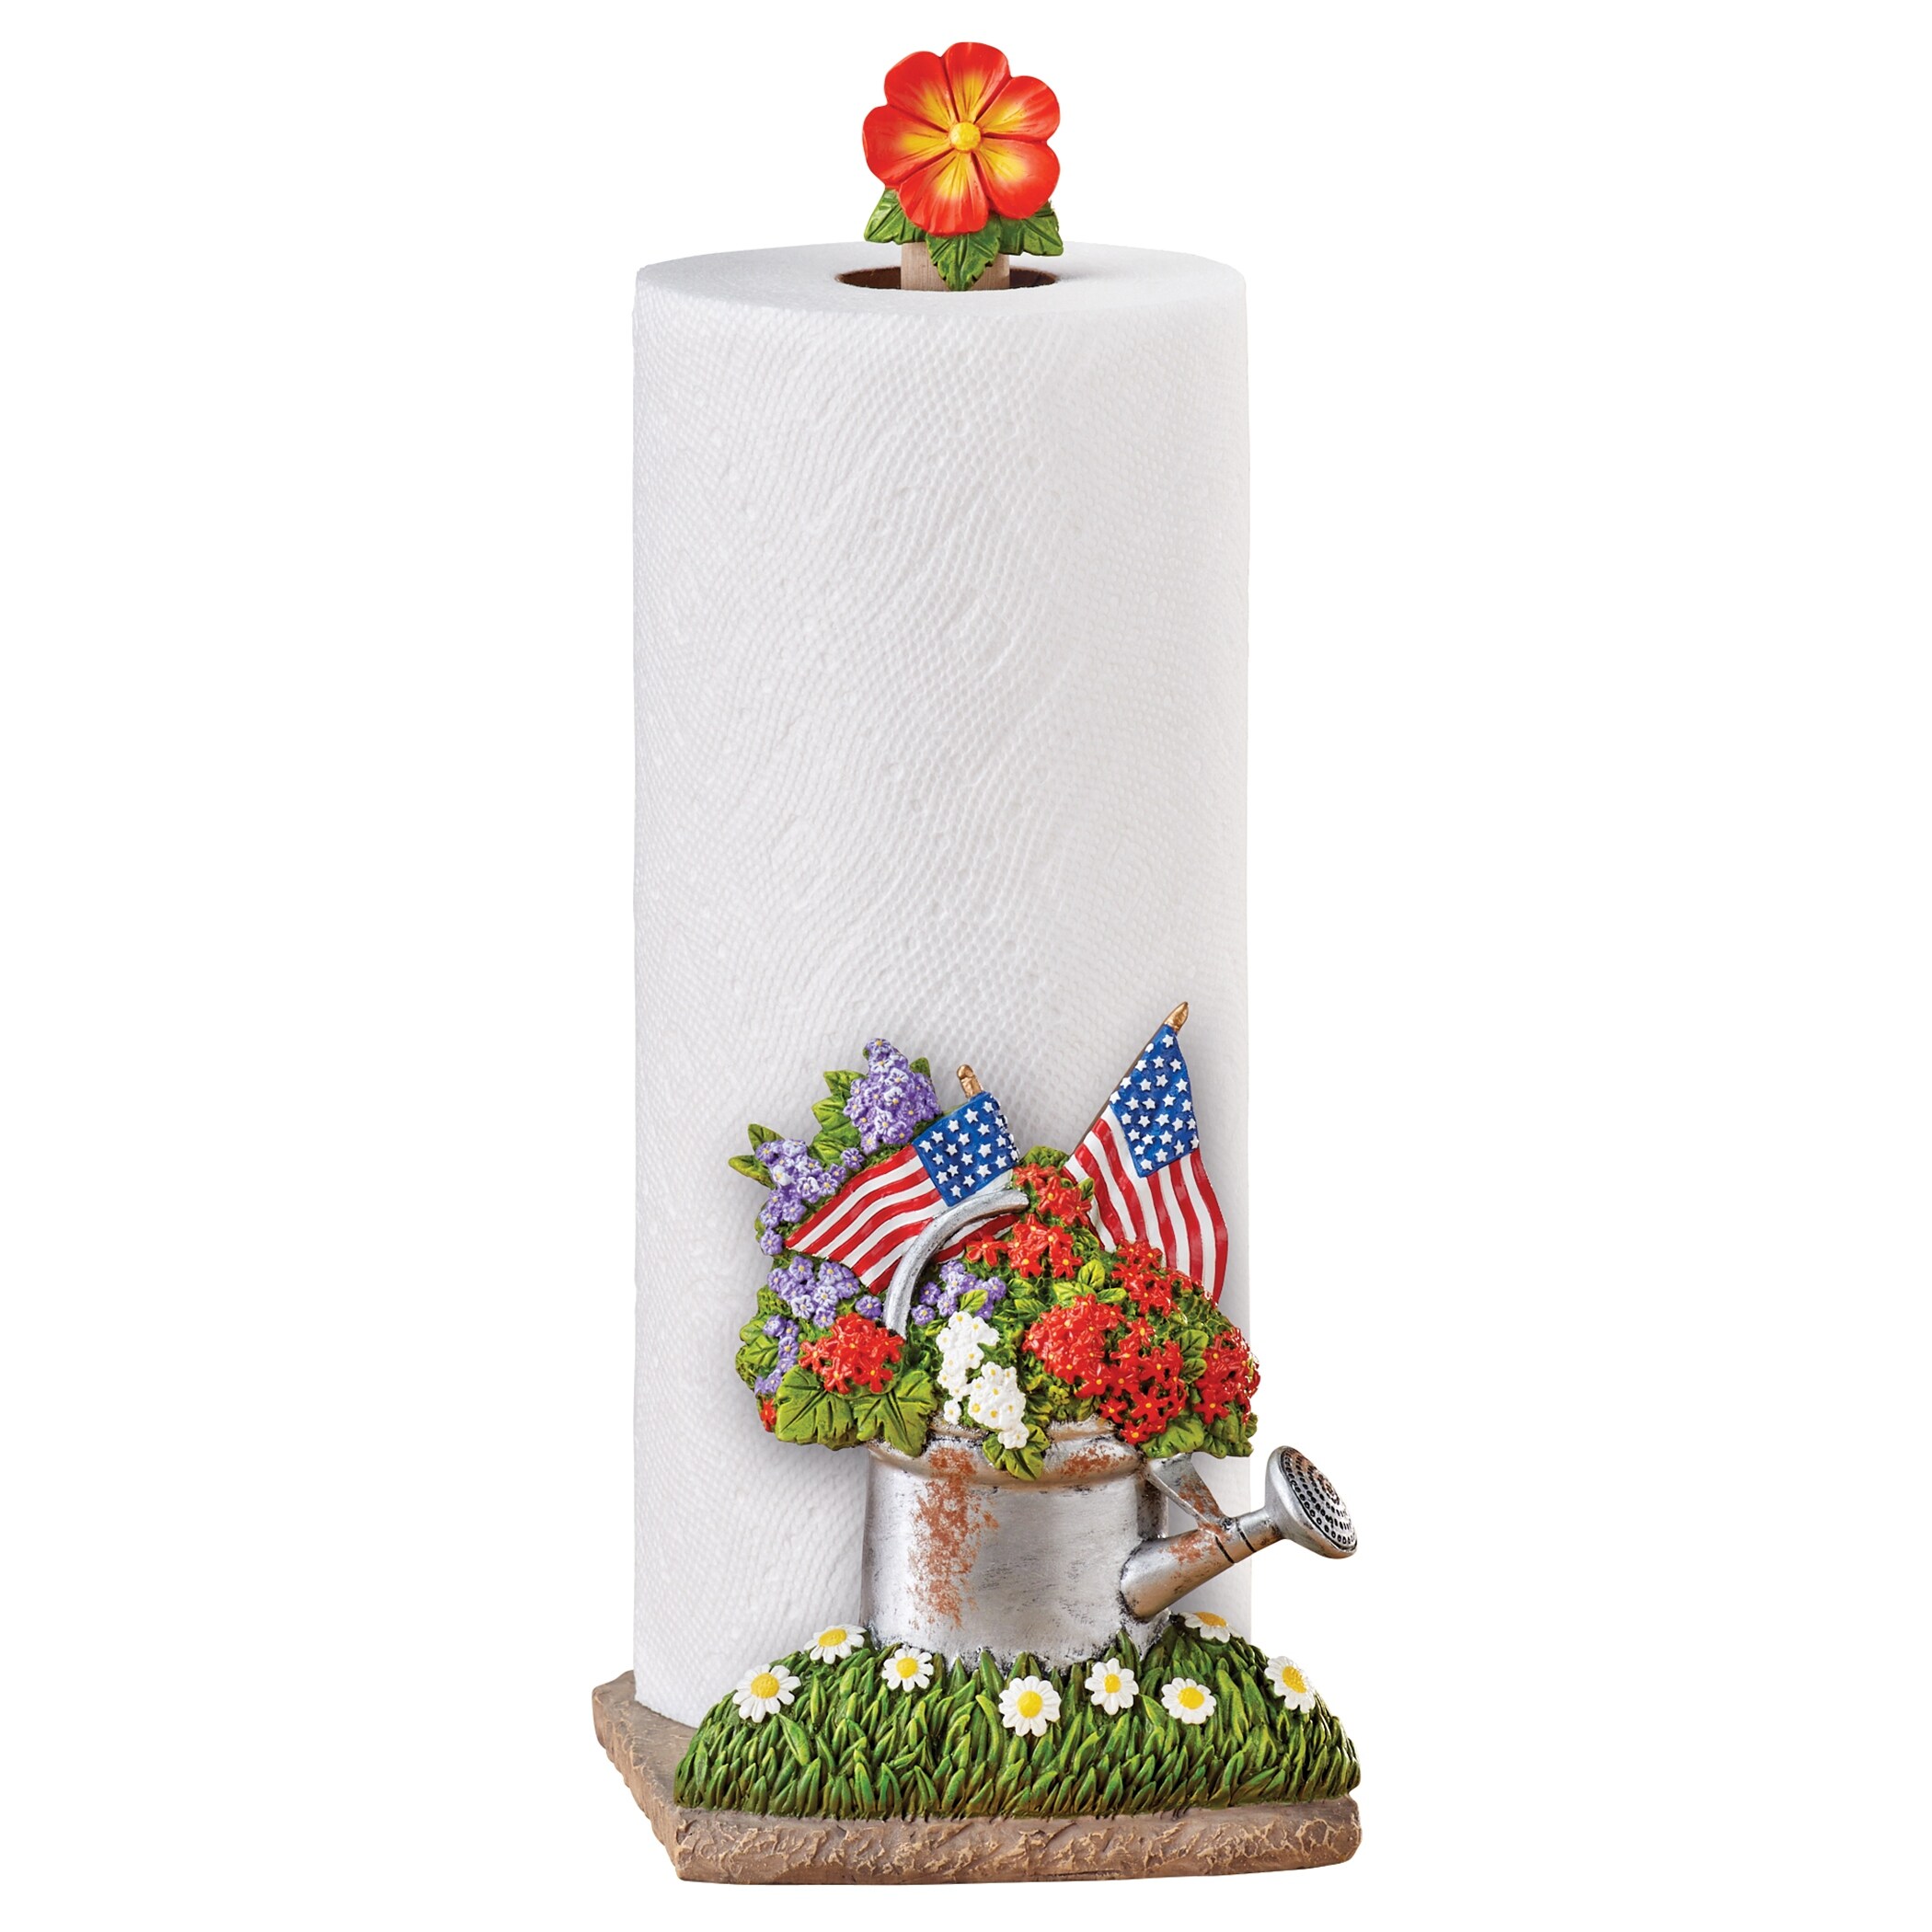 https://ak1.ostkcdn.com/images/products/is/images/direct/05f4ecc1b47cf8af76c225a0d7045f49ba61820d/Hand-Painted-Americana-Standing-Paper-Towel-Holder.jpg